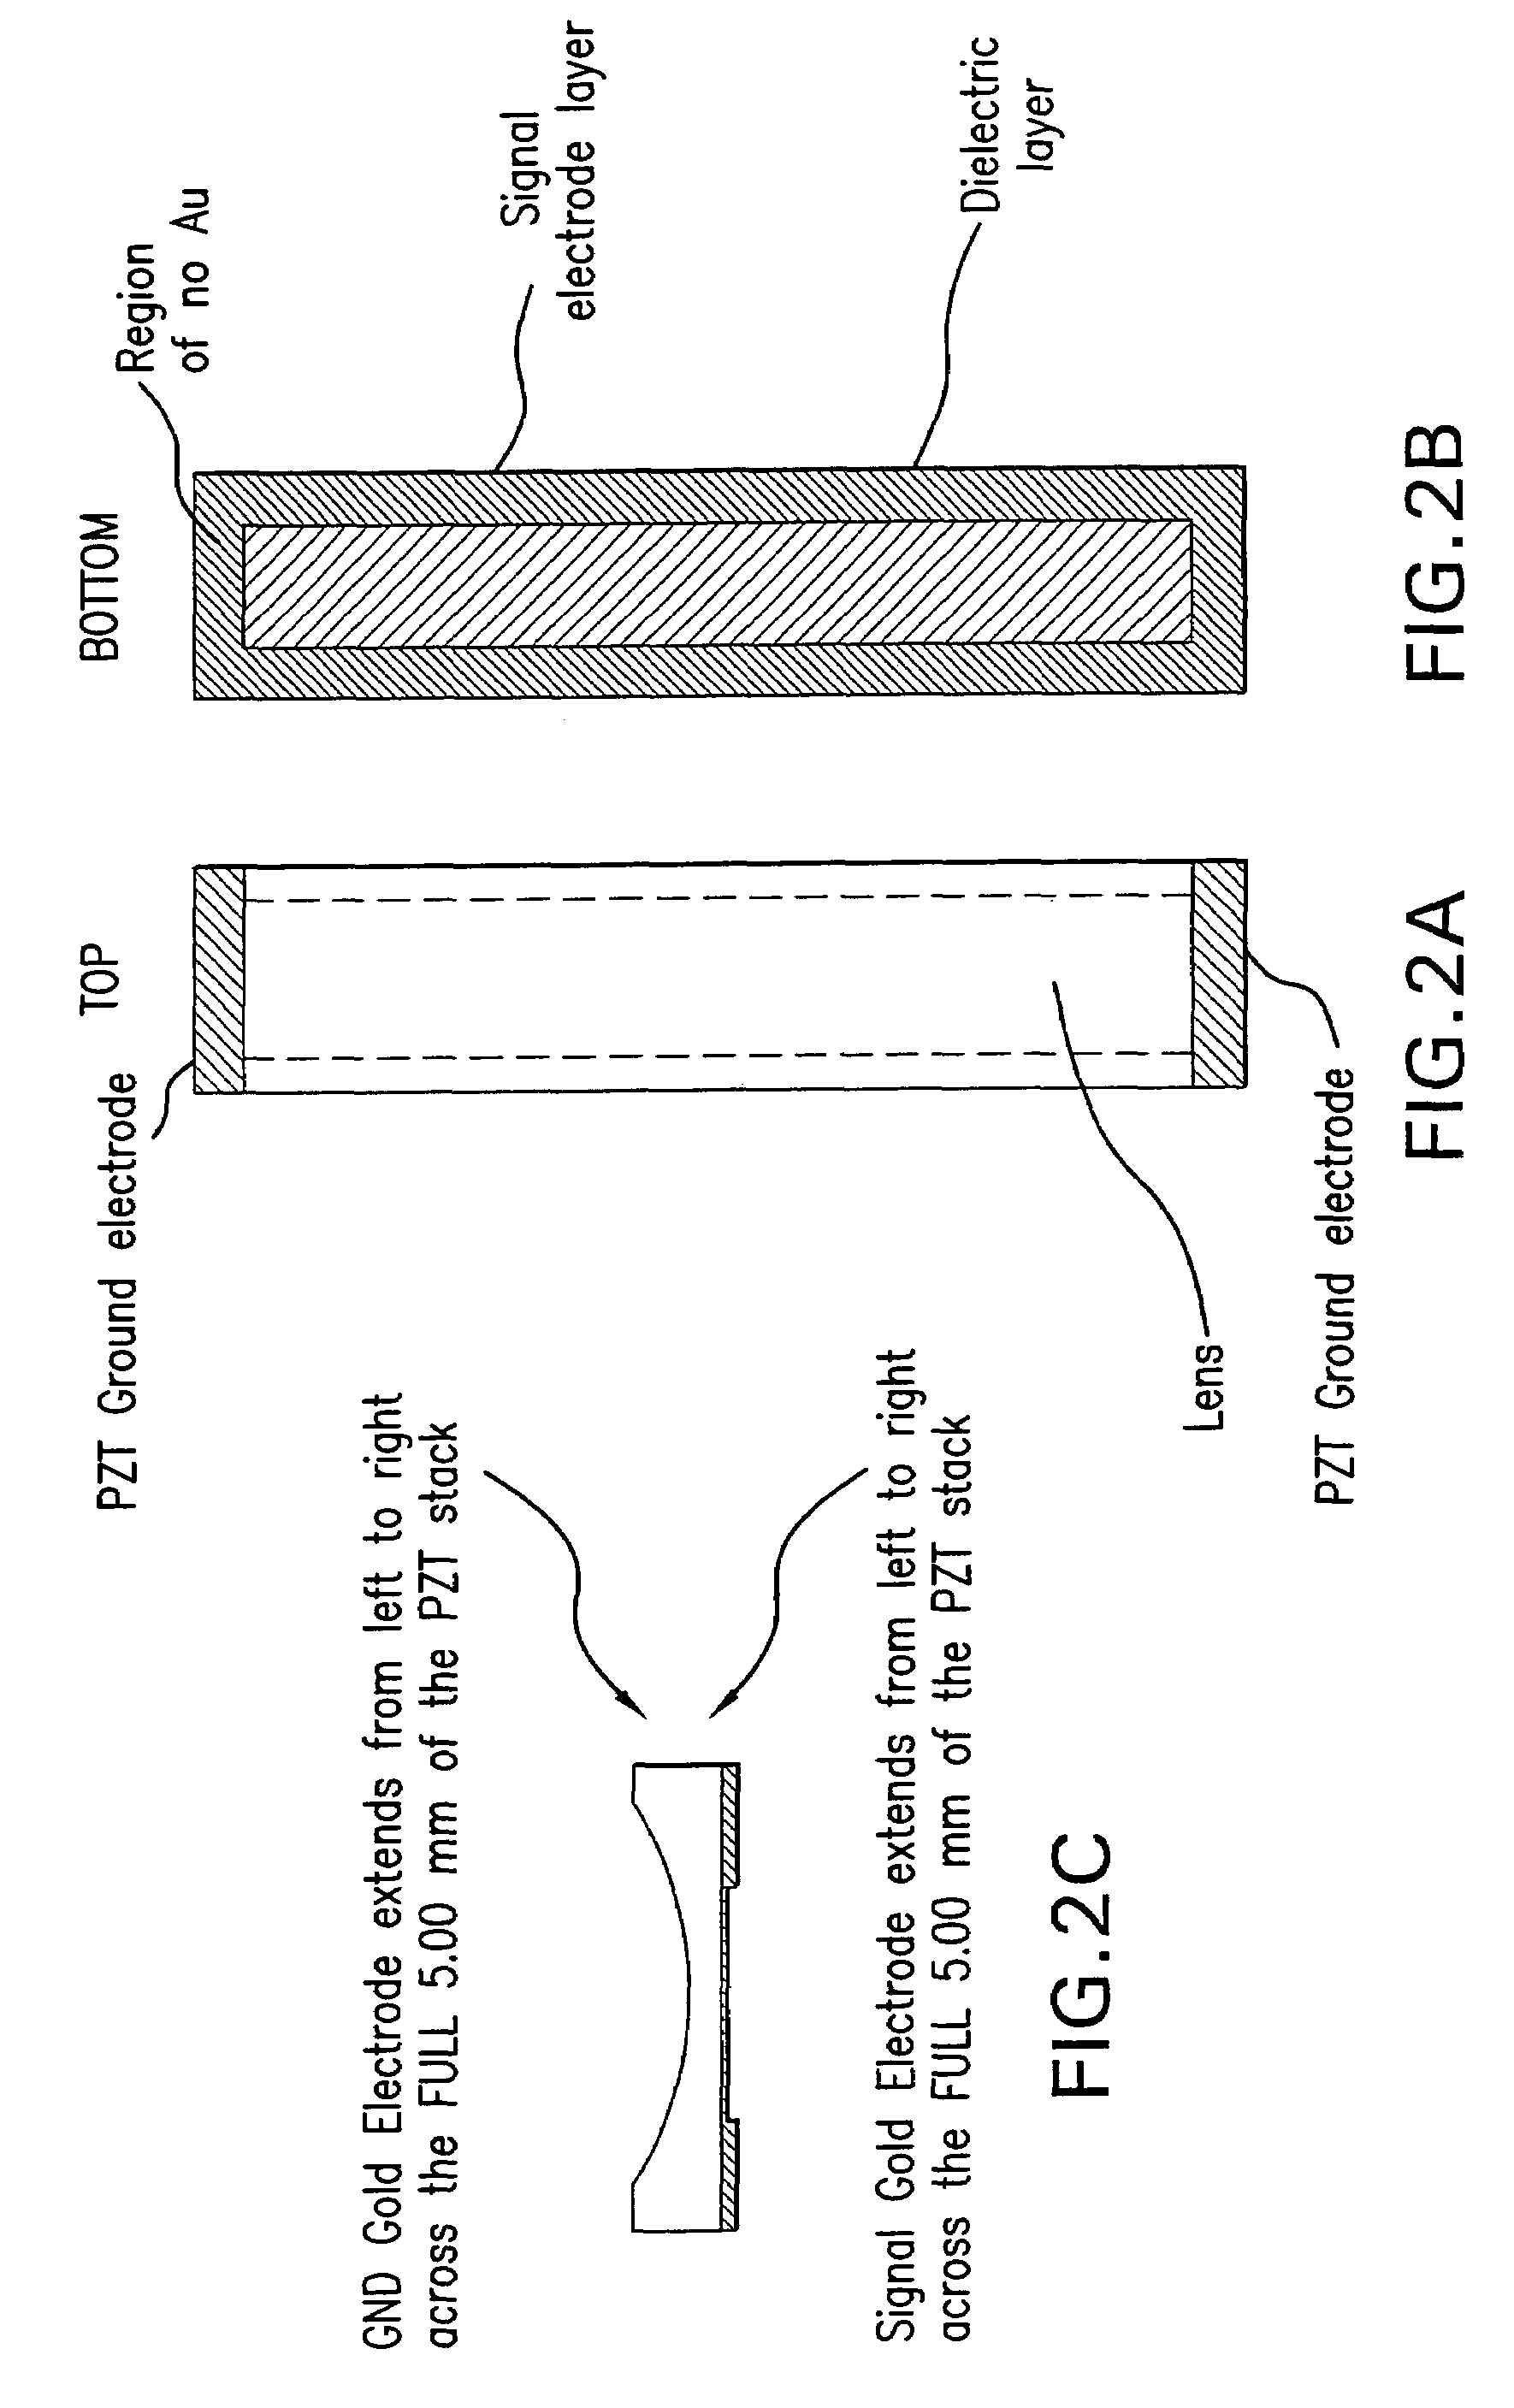 High frequency array ultrasound system